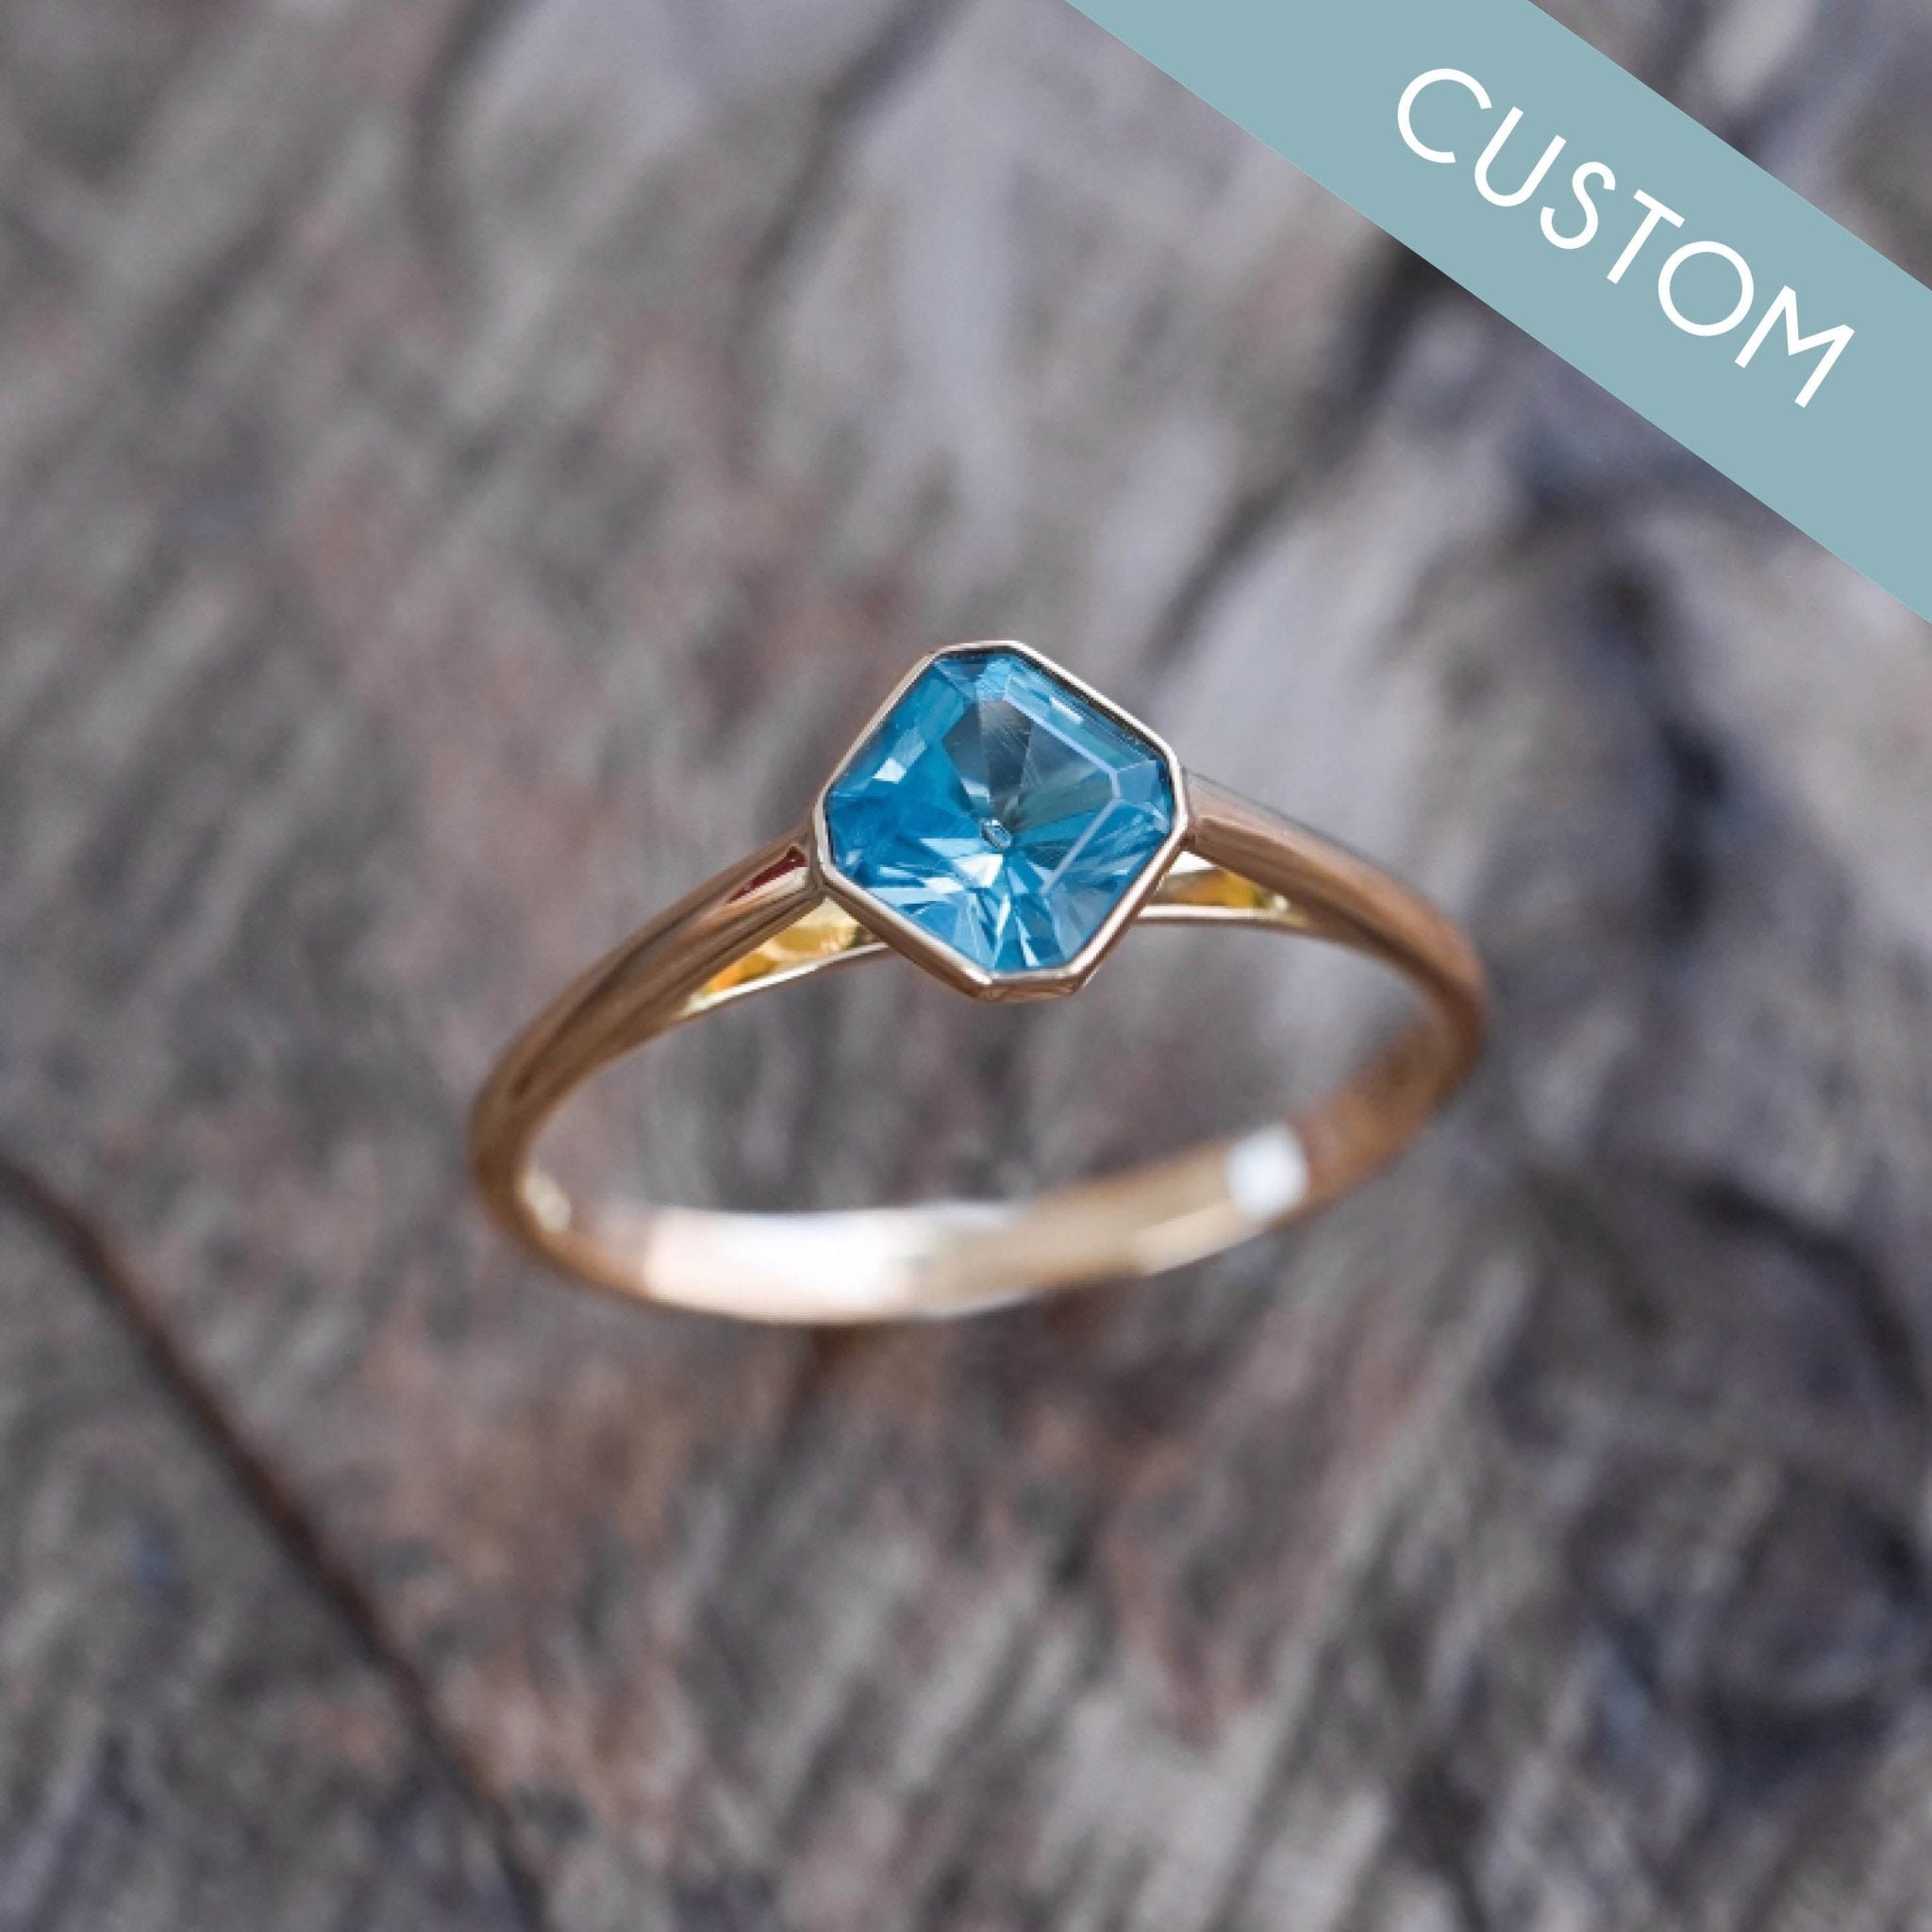 Custom Topaz Ring in Gold - Gardens of the Sun | Ethical Jewelry